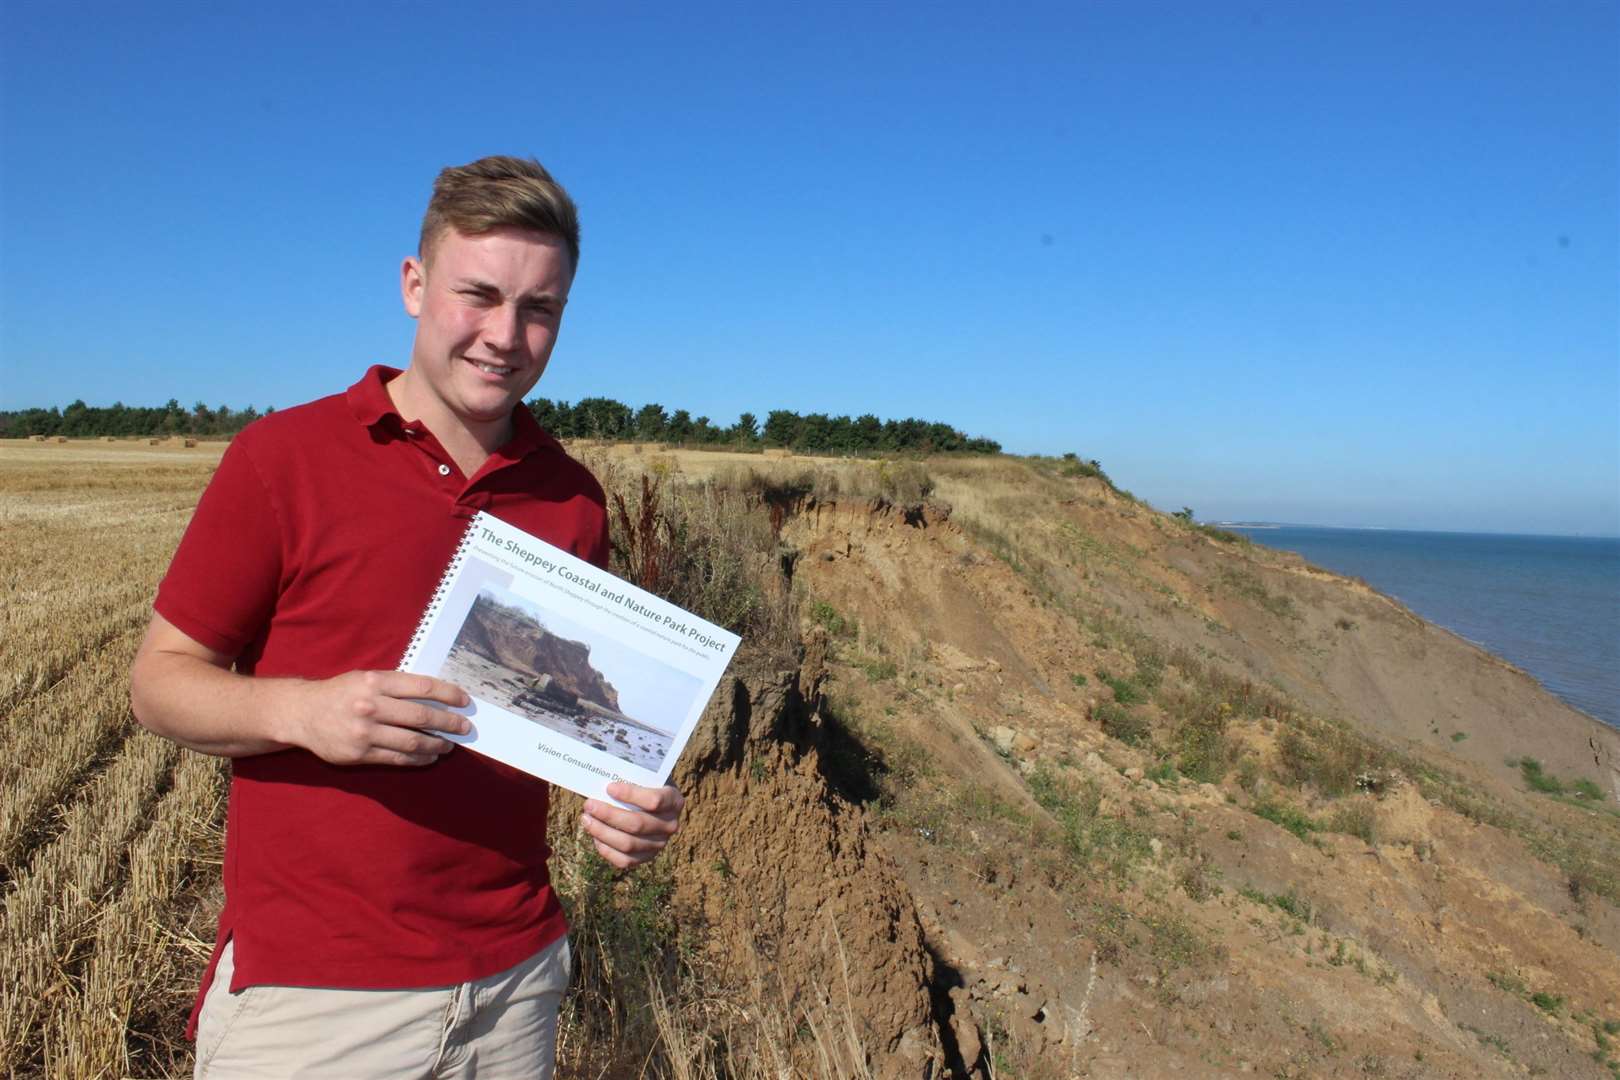 James Attwood of SW Attwood and Partners on the cliffs with a brochure for an ambitious £500 million scheme to rebuild Sheppey's crumbling coastline with a new sea wall and country park